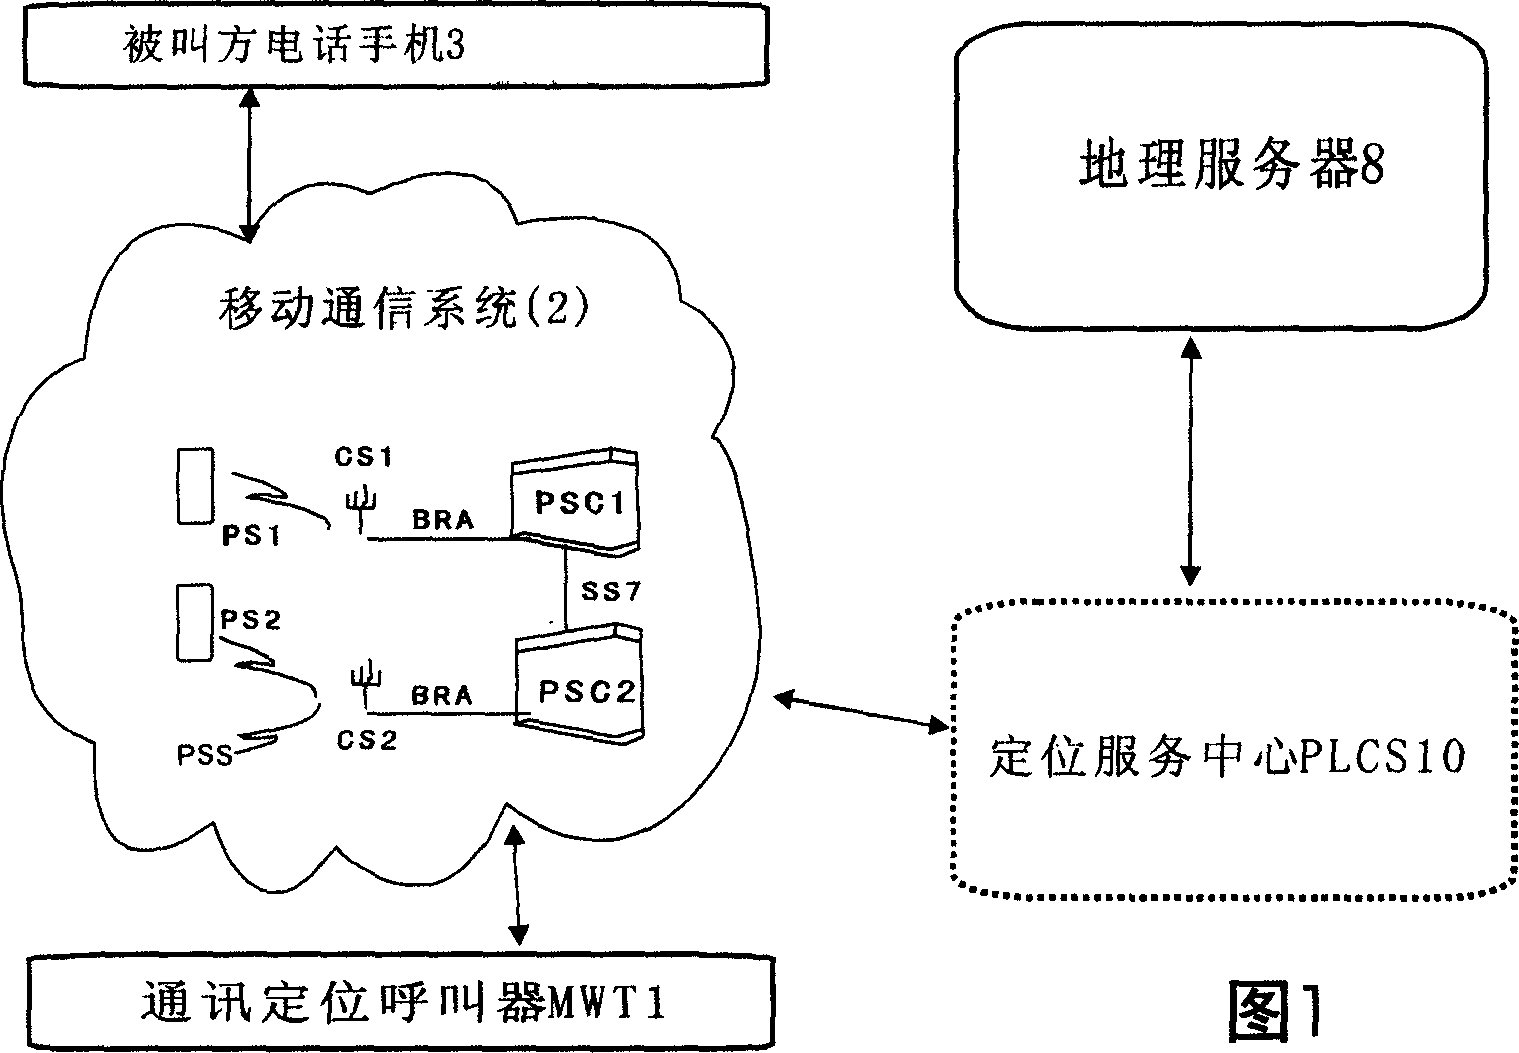 Communication calling positioning tracking system and method for providing positioning tracking service